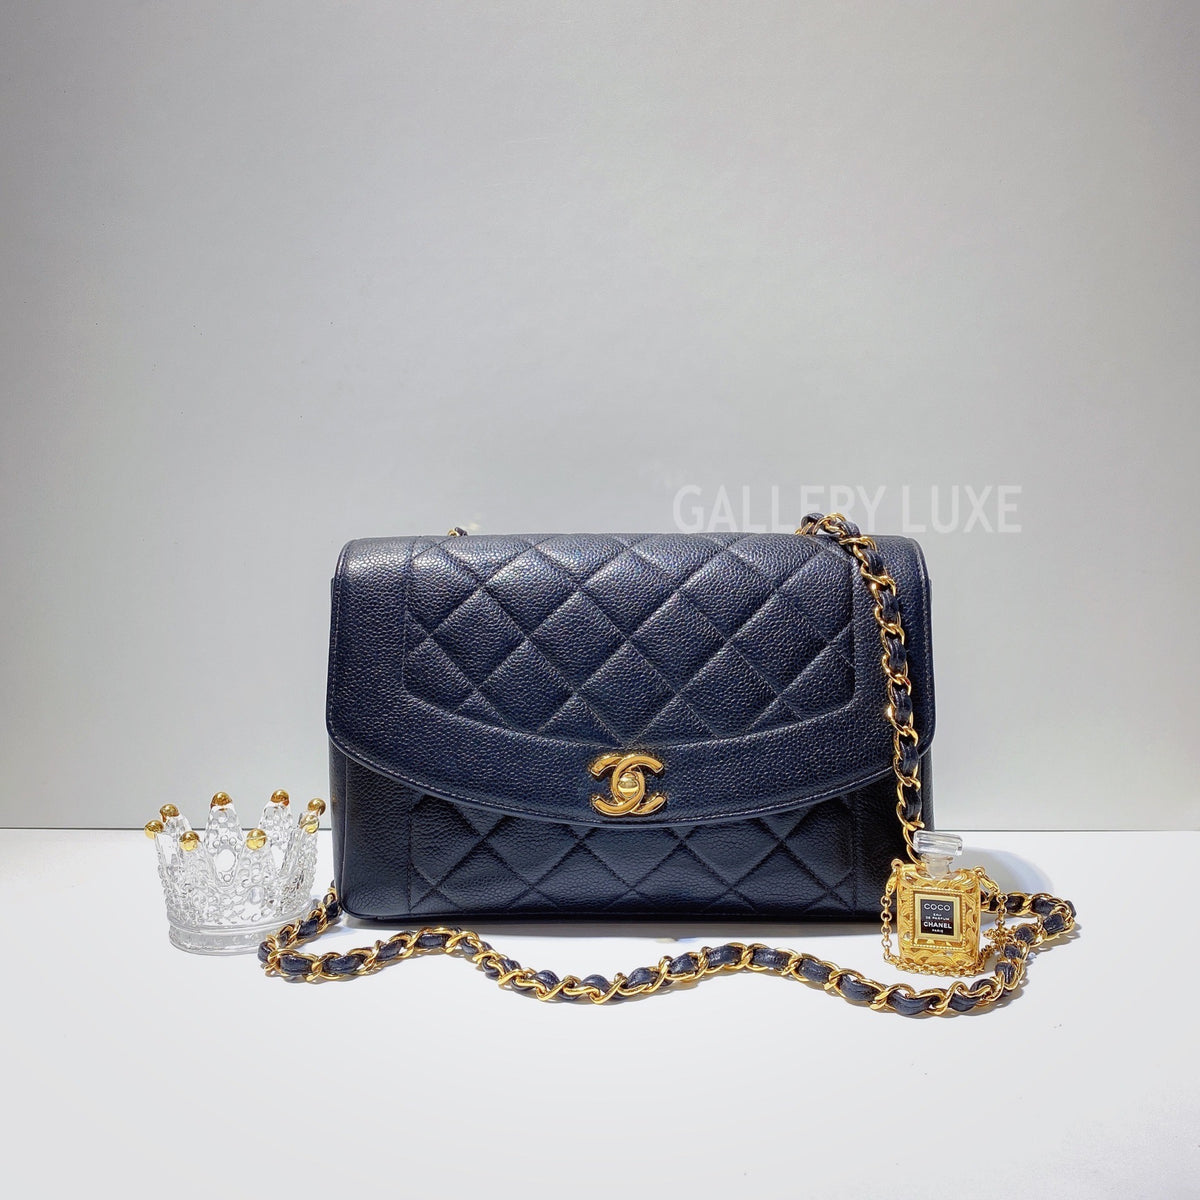 No.3004-Chanel Vintage Caviar Diana Bag 25cm with Backpocket – Gallery Luxe